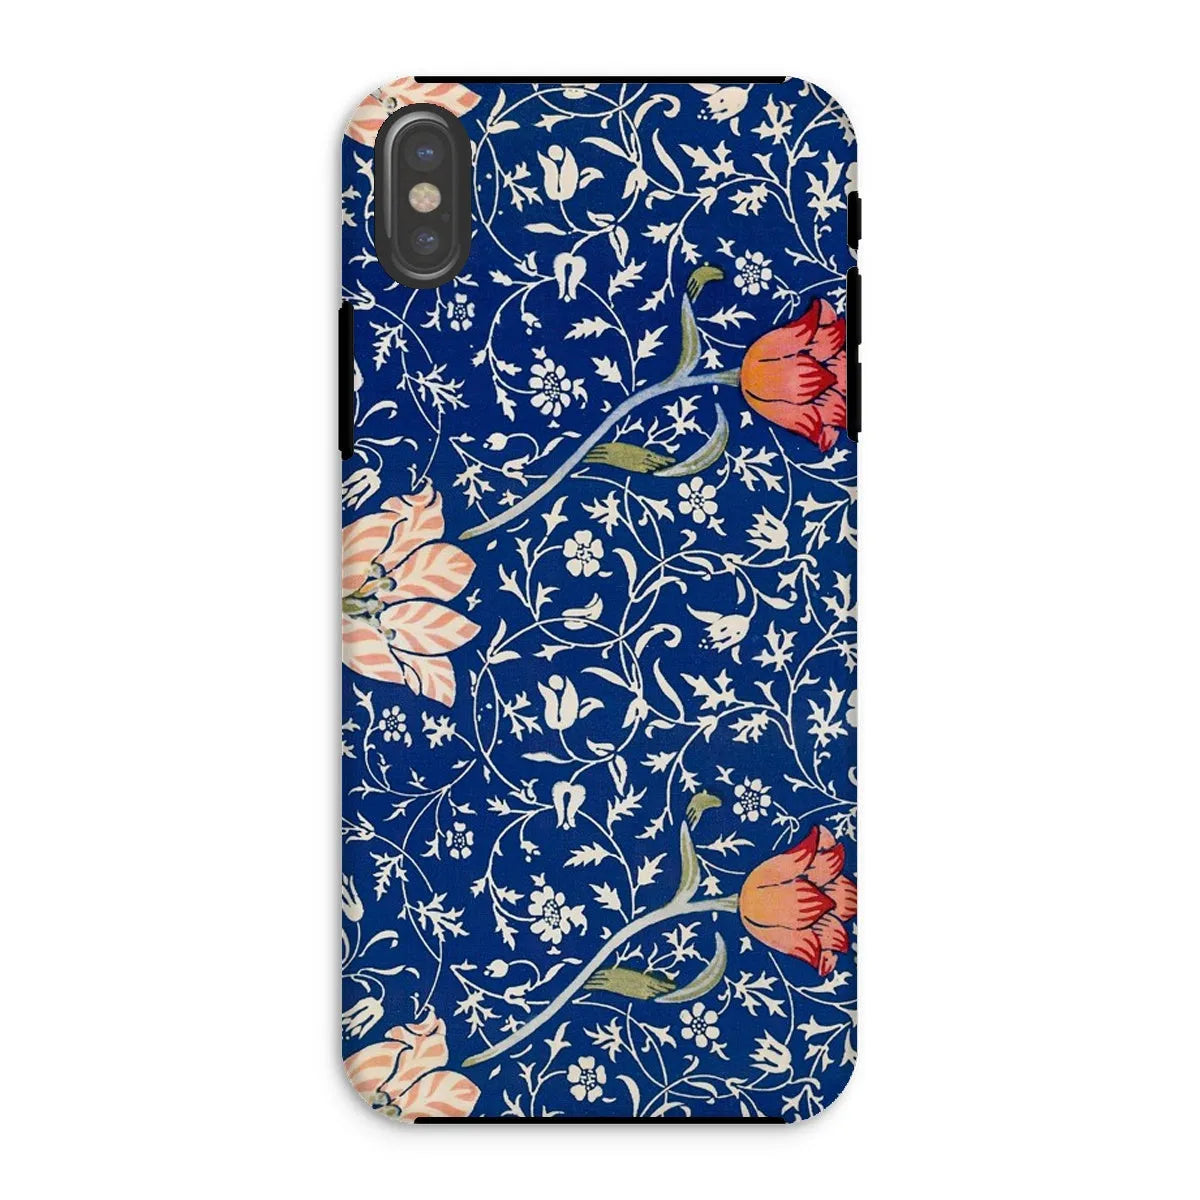 Medway - Floral Aesthetic Art Phone Case - William Morris - Iphone Xs / Matte - Mobile Phone Cases - Aesthetic Art